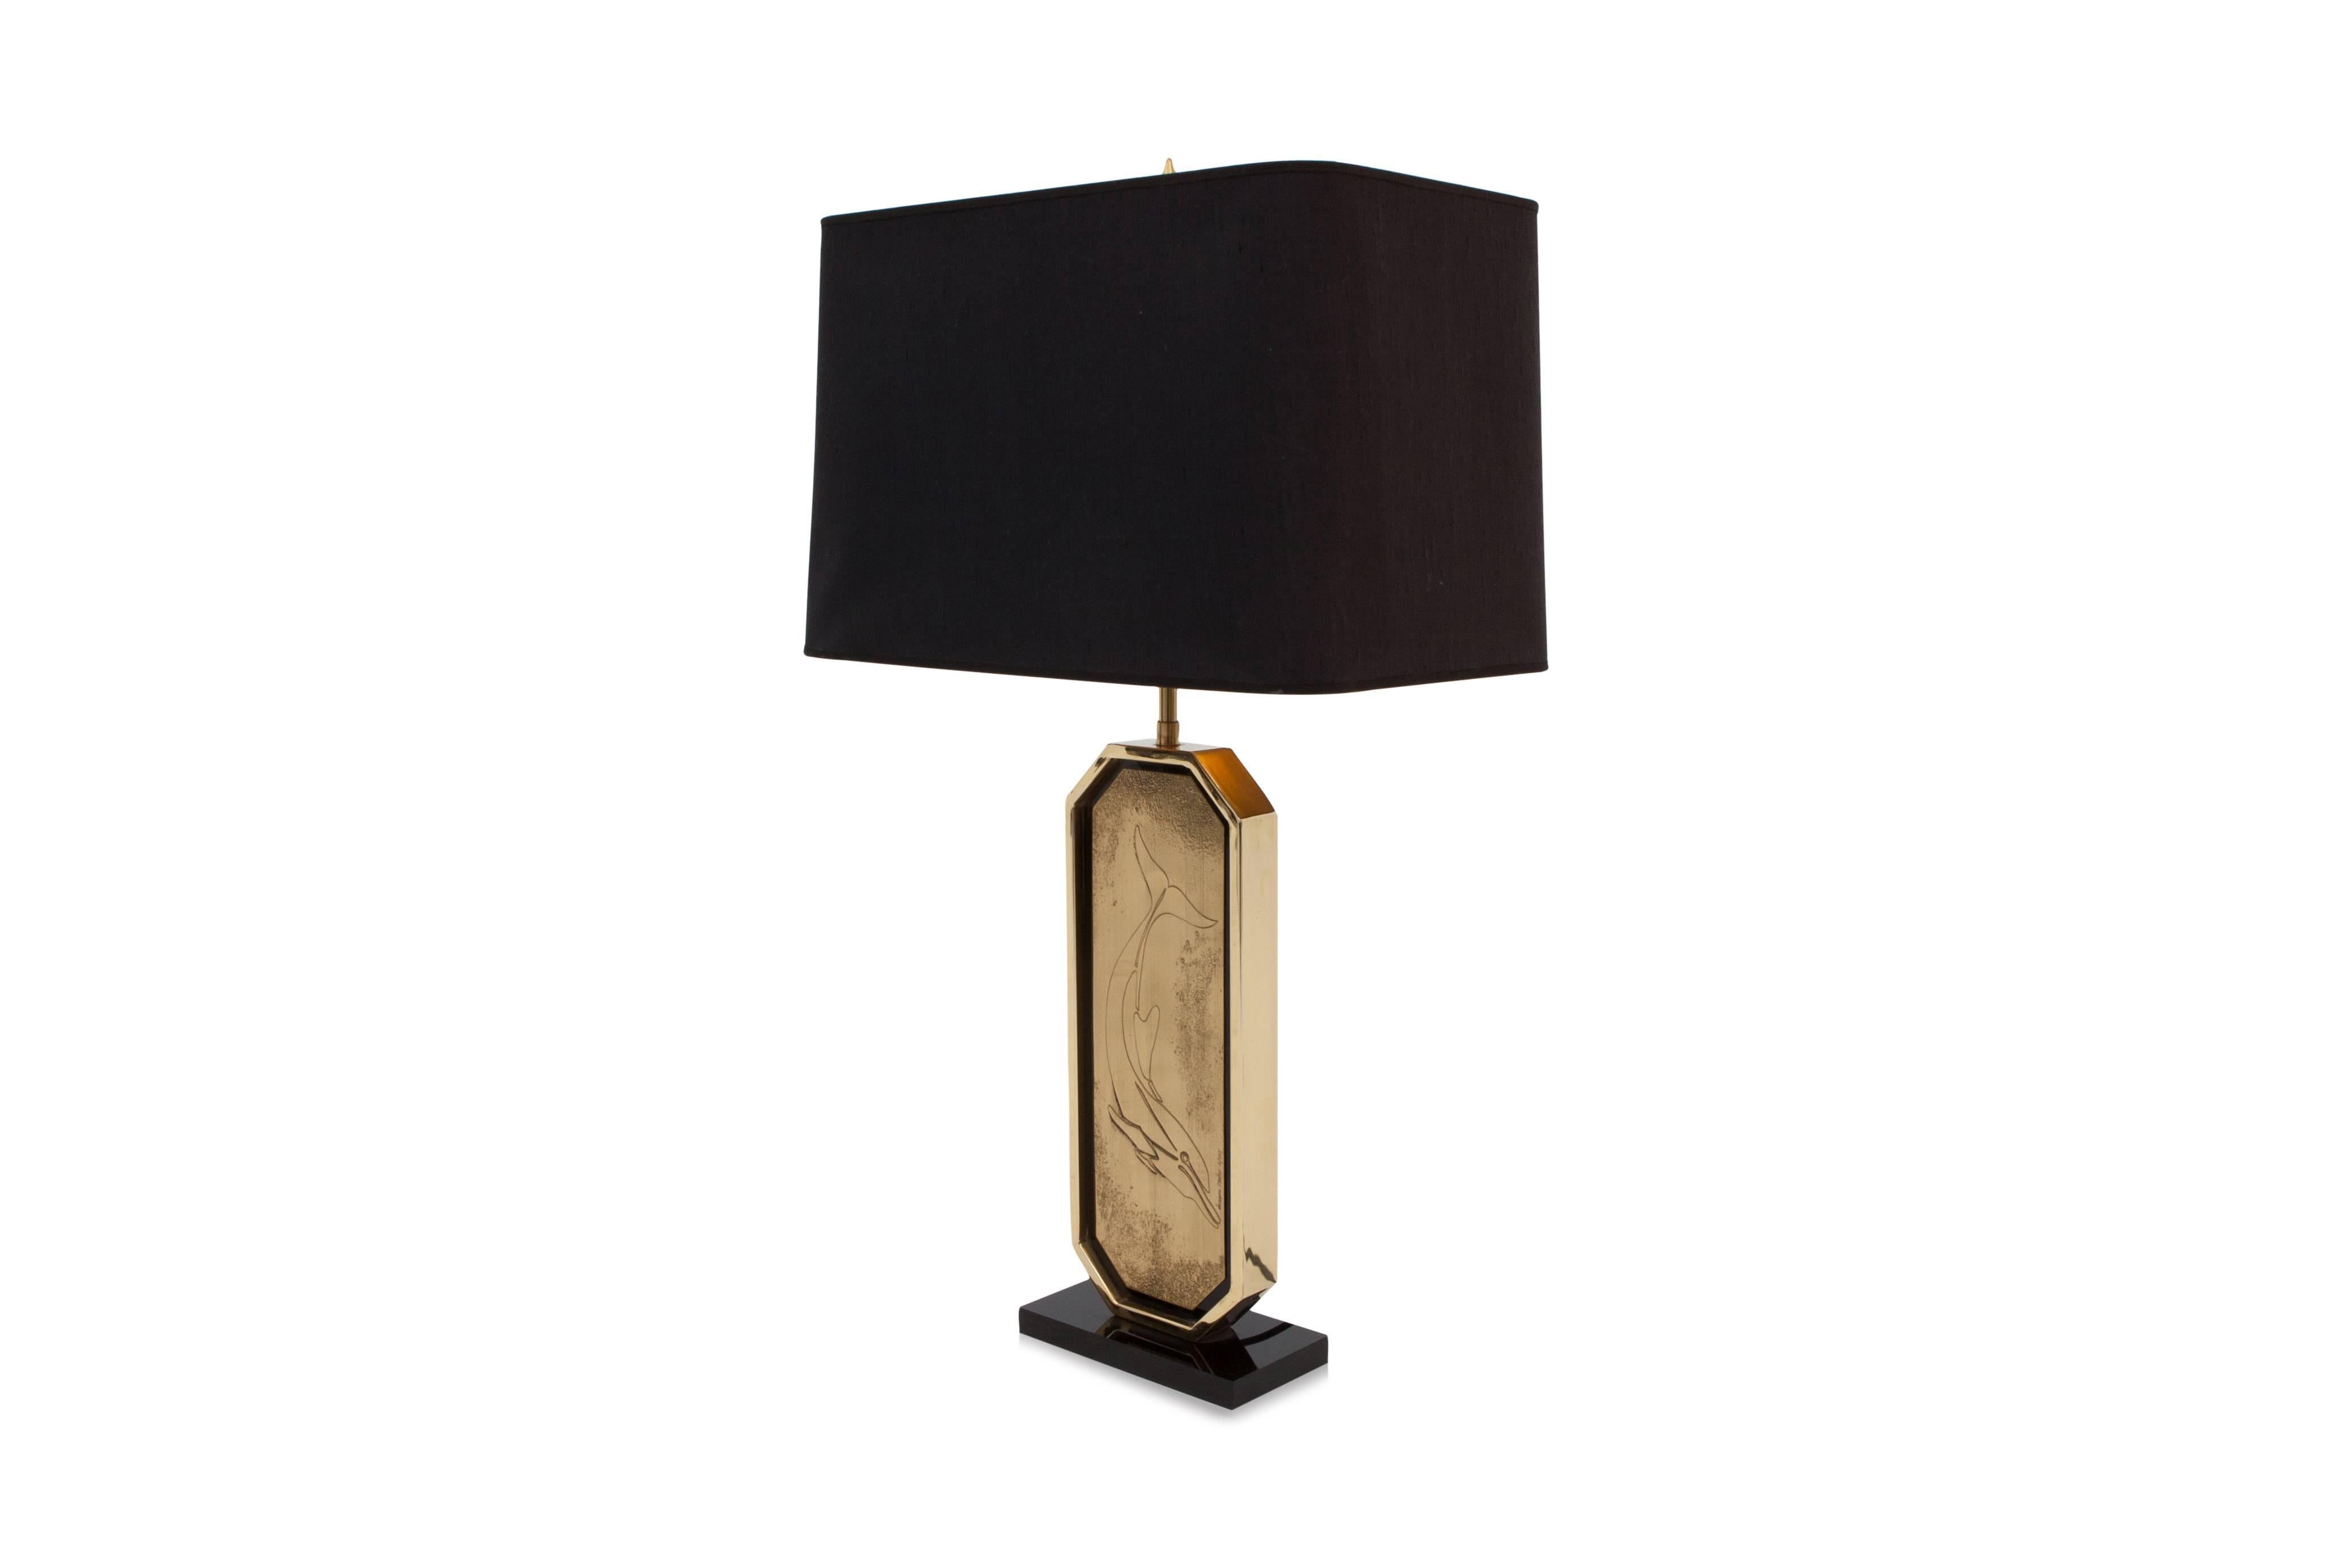 Hollywood Regency style lamp.

Brass etched artwork by Maho (attributed as alter ego of George Matthias).
Black glass center with 23-karat gold edges, black linen shade.

Belgium, 1980s.

Measures: H 80 cm, W 27 cm, D 43 cm.